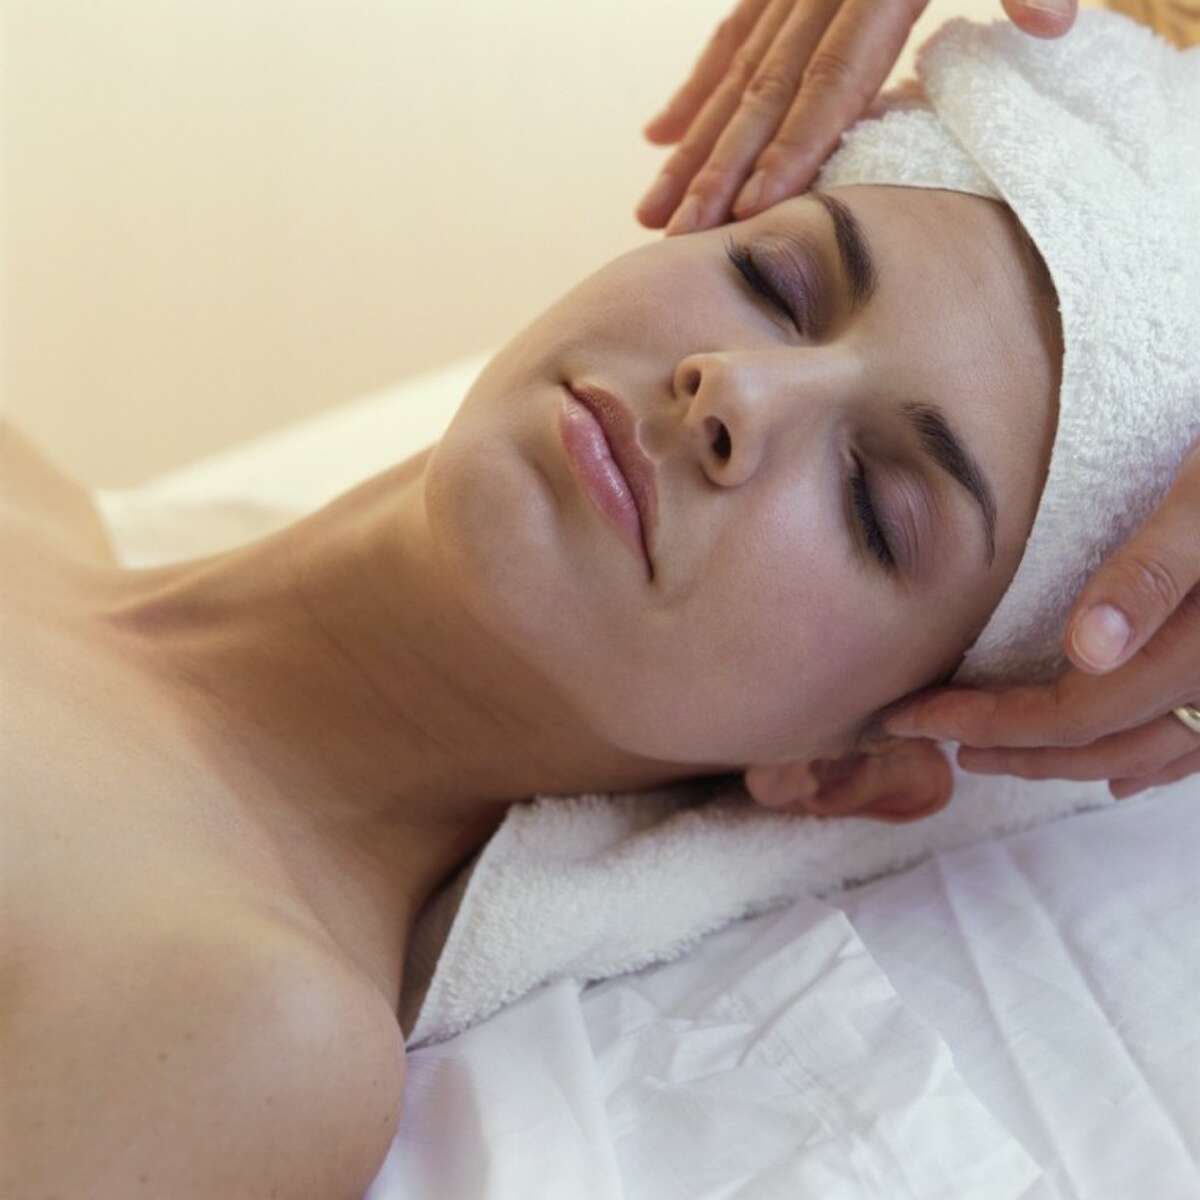 Indian Head Massage Relaxes And Improves Health 0995